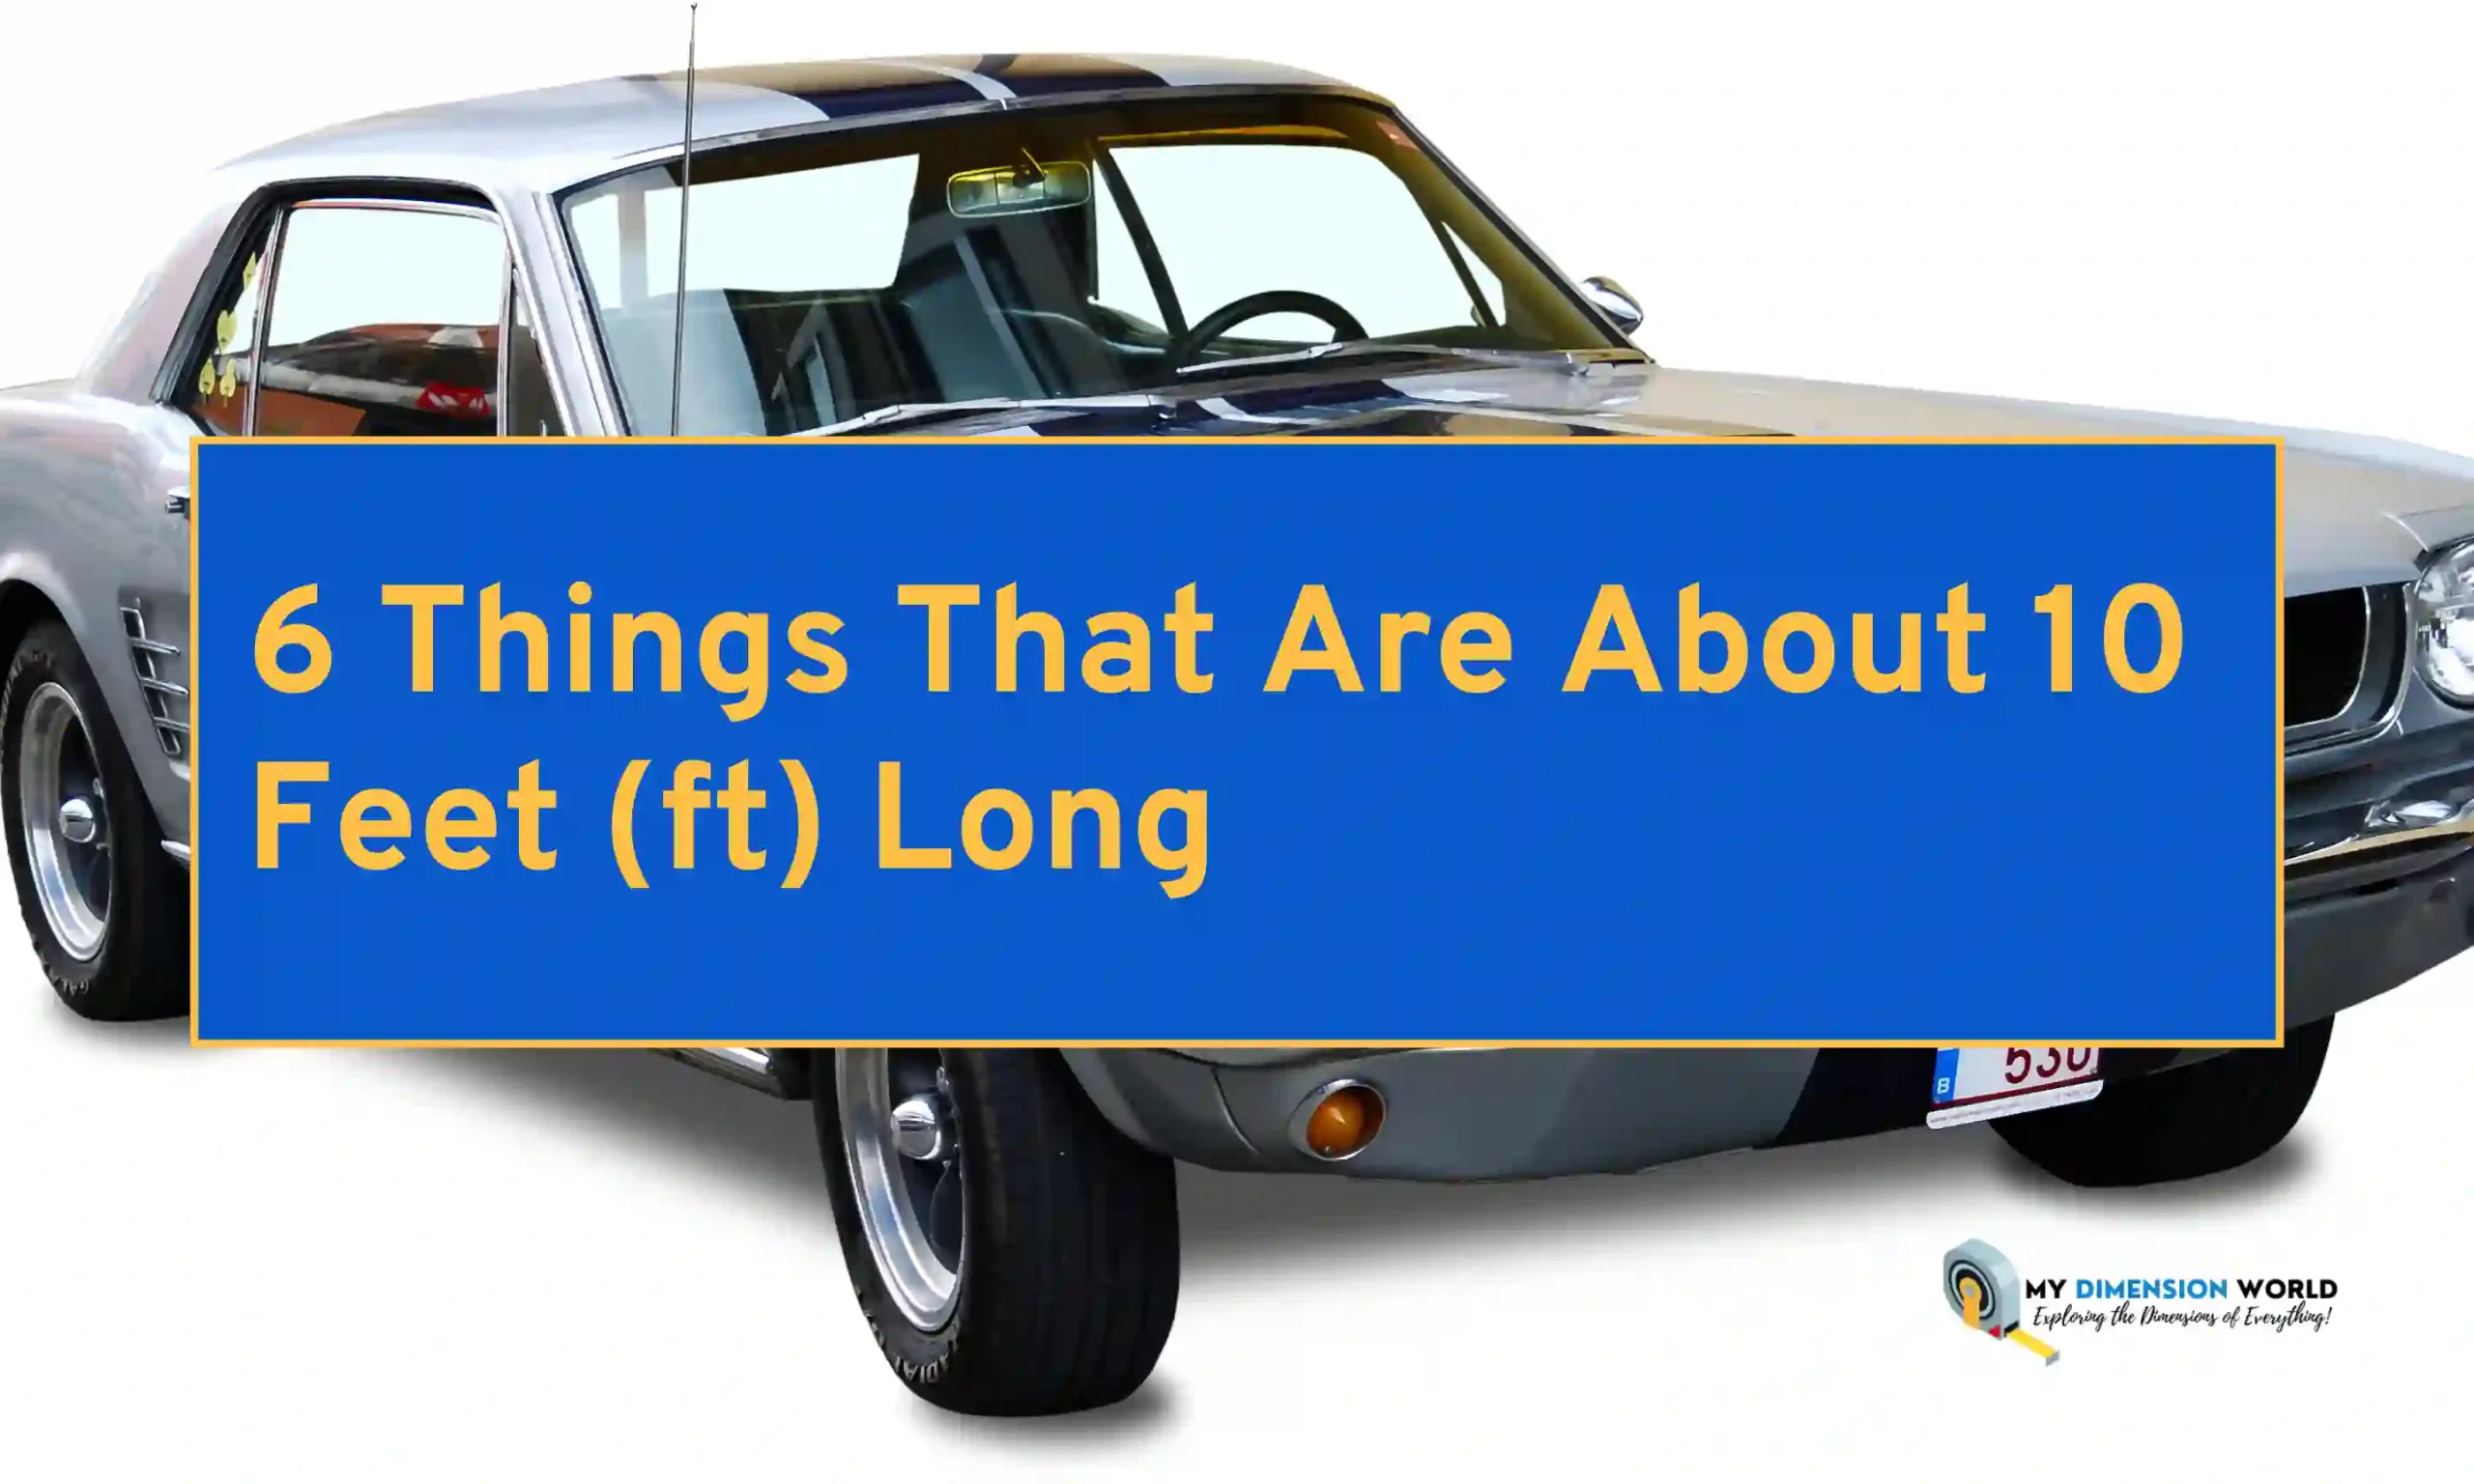 6 Things That Are About 10 Feet (ft) Long